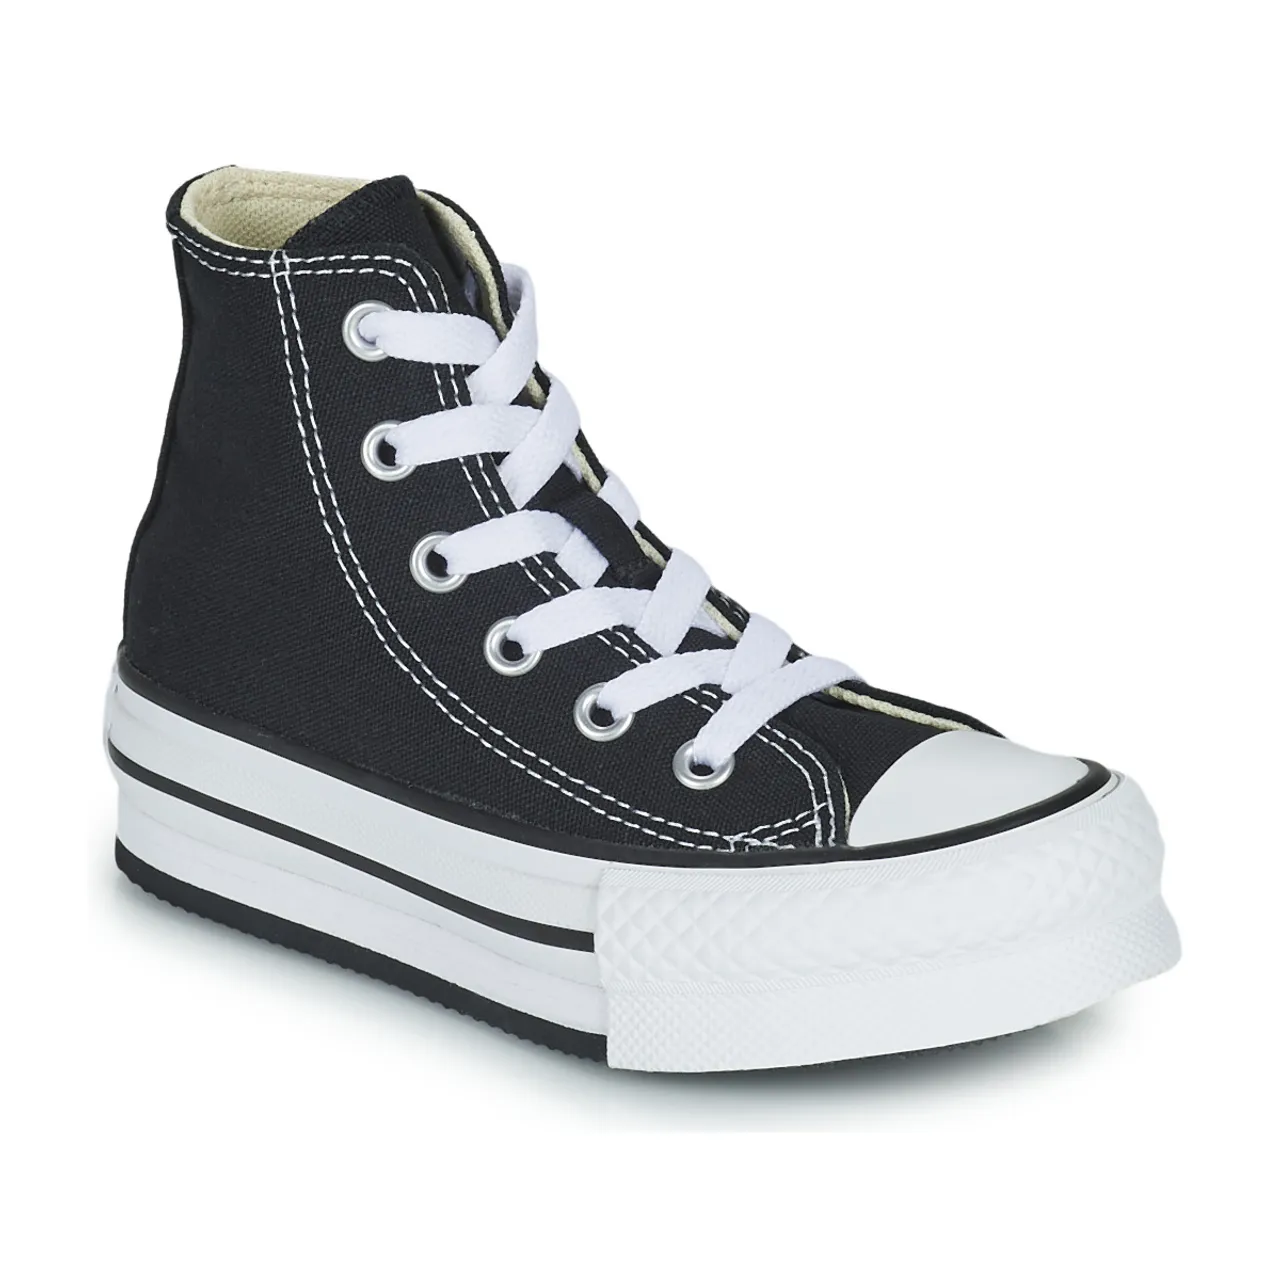 Converse  Chuck Taylor All Star EVA Lift Foundation Hi  boys's Children's Shoes (High-top Trainers) in Black